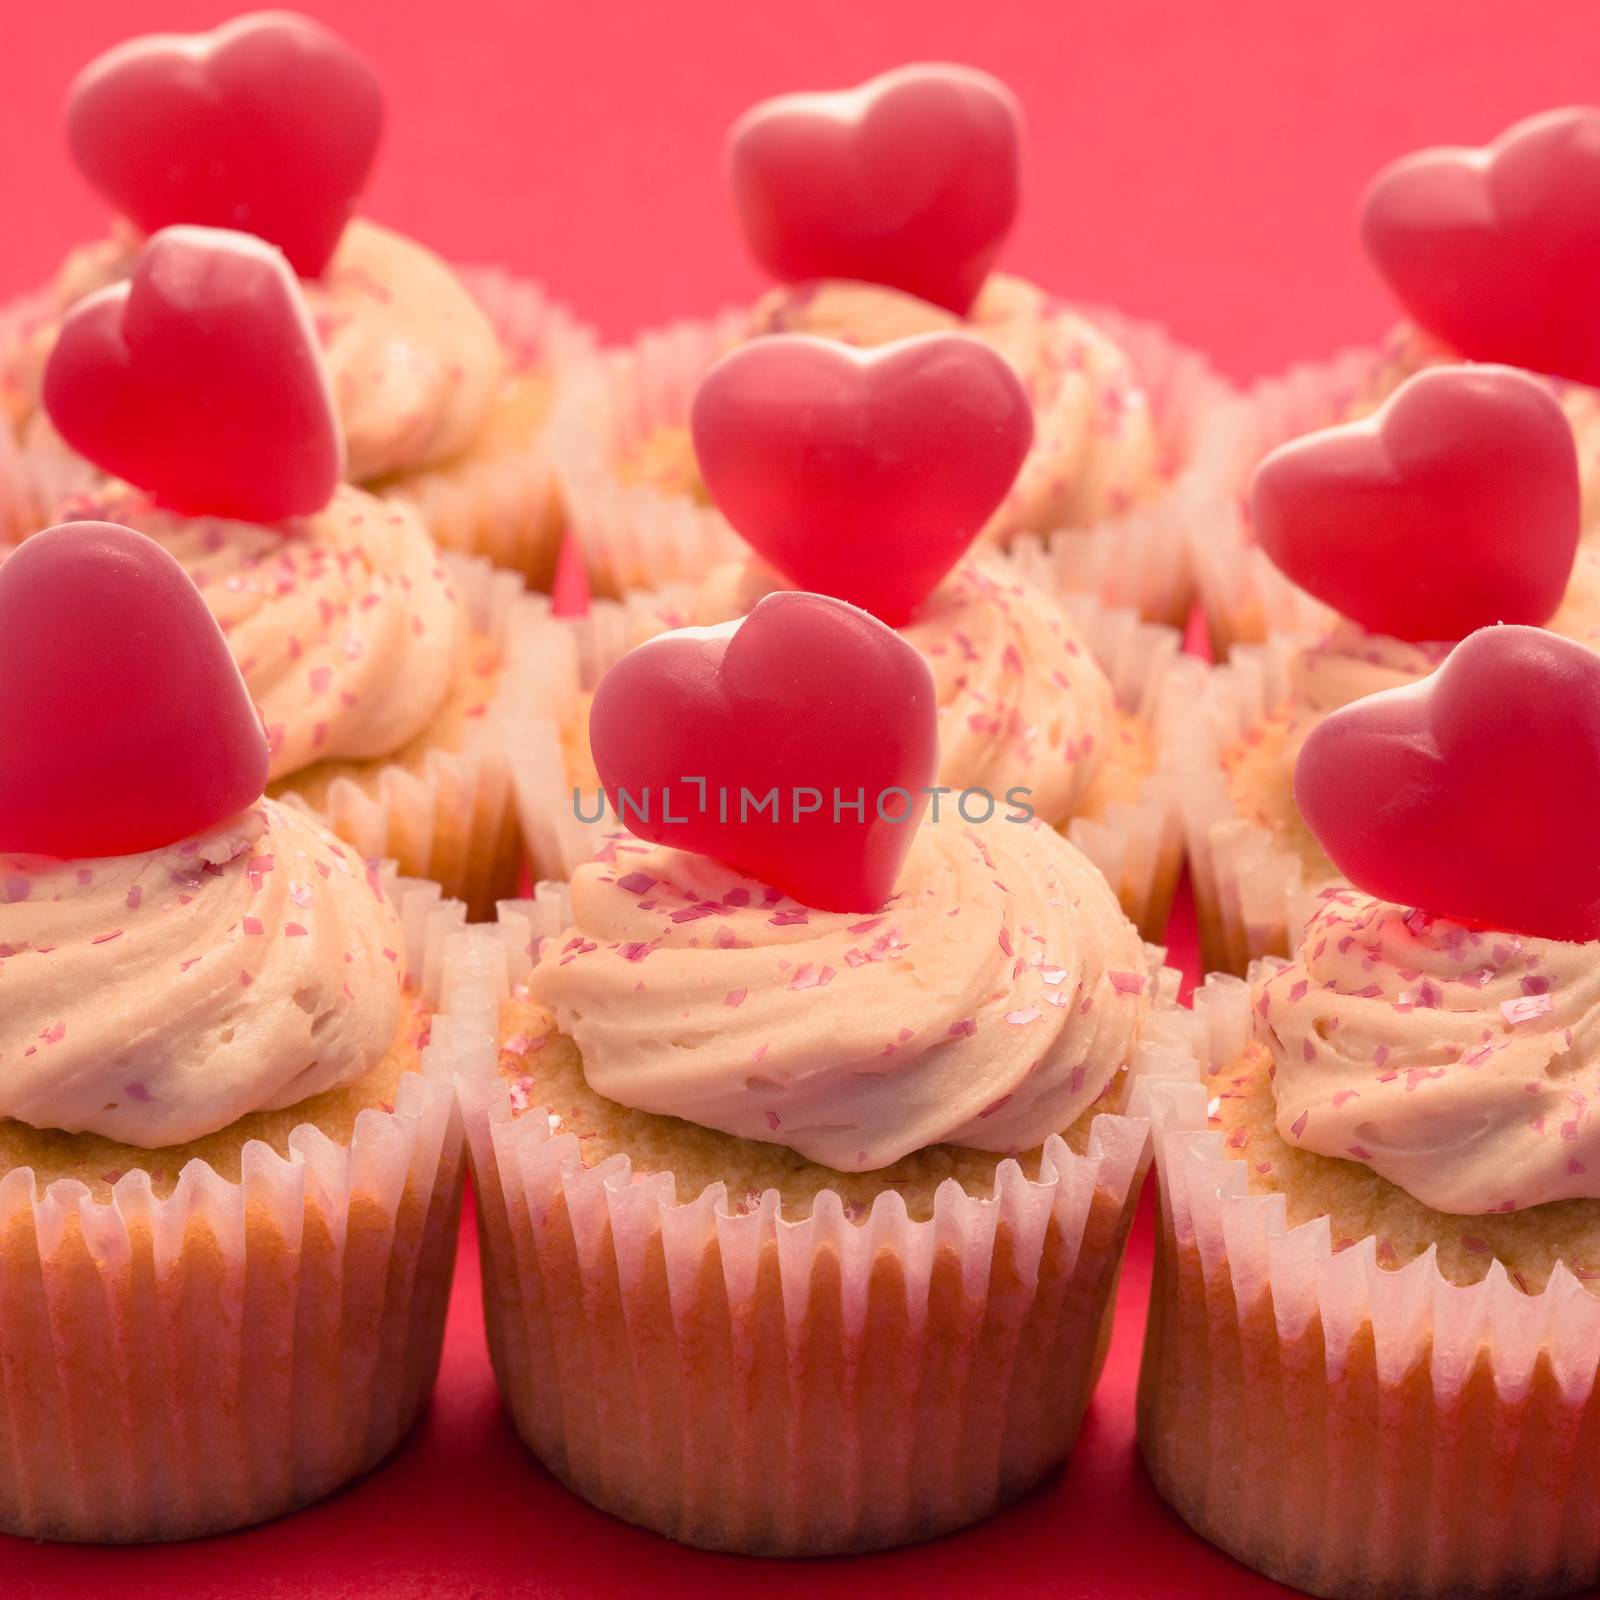 Valentines cupcakes with love hearts by Wavebreakmedia